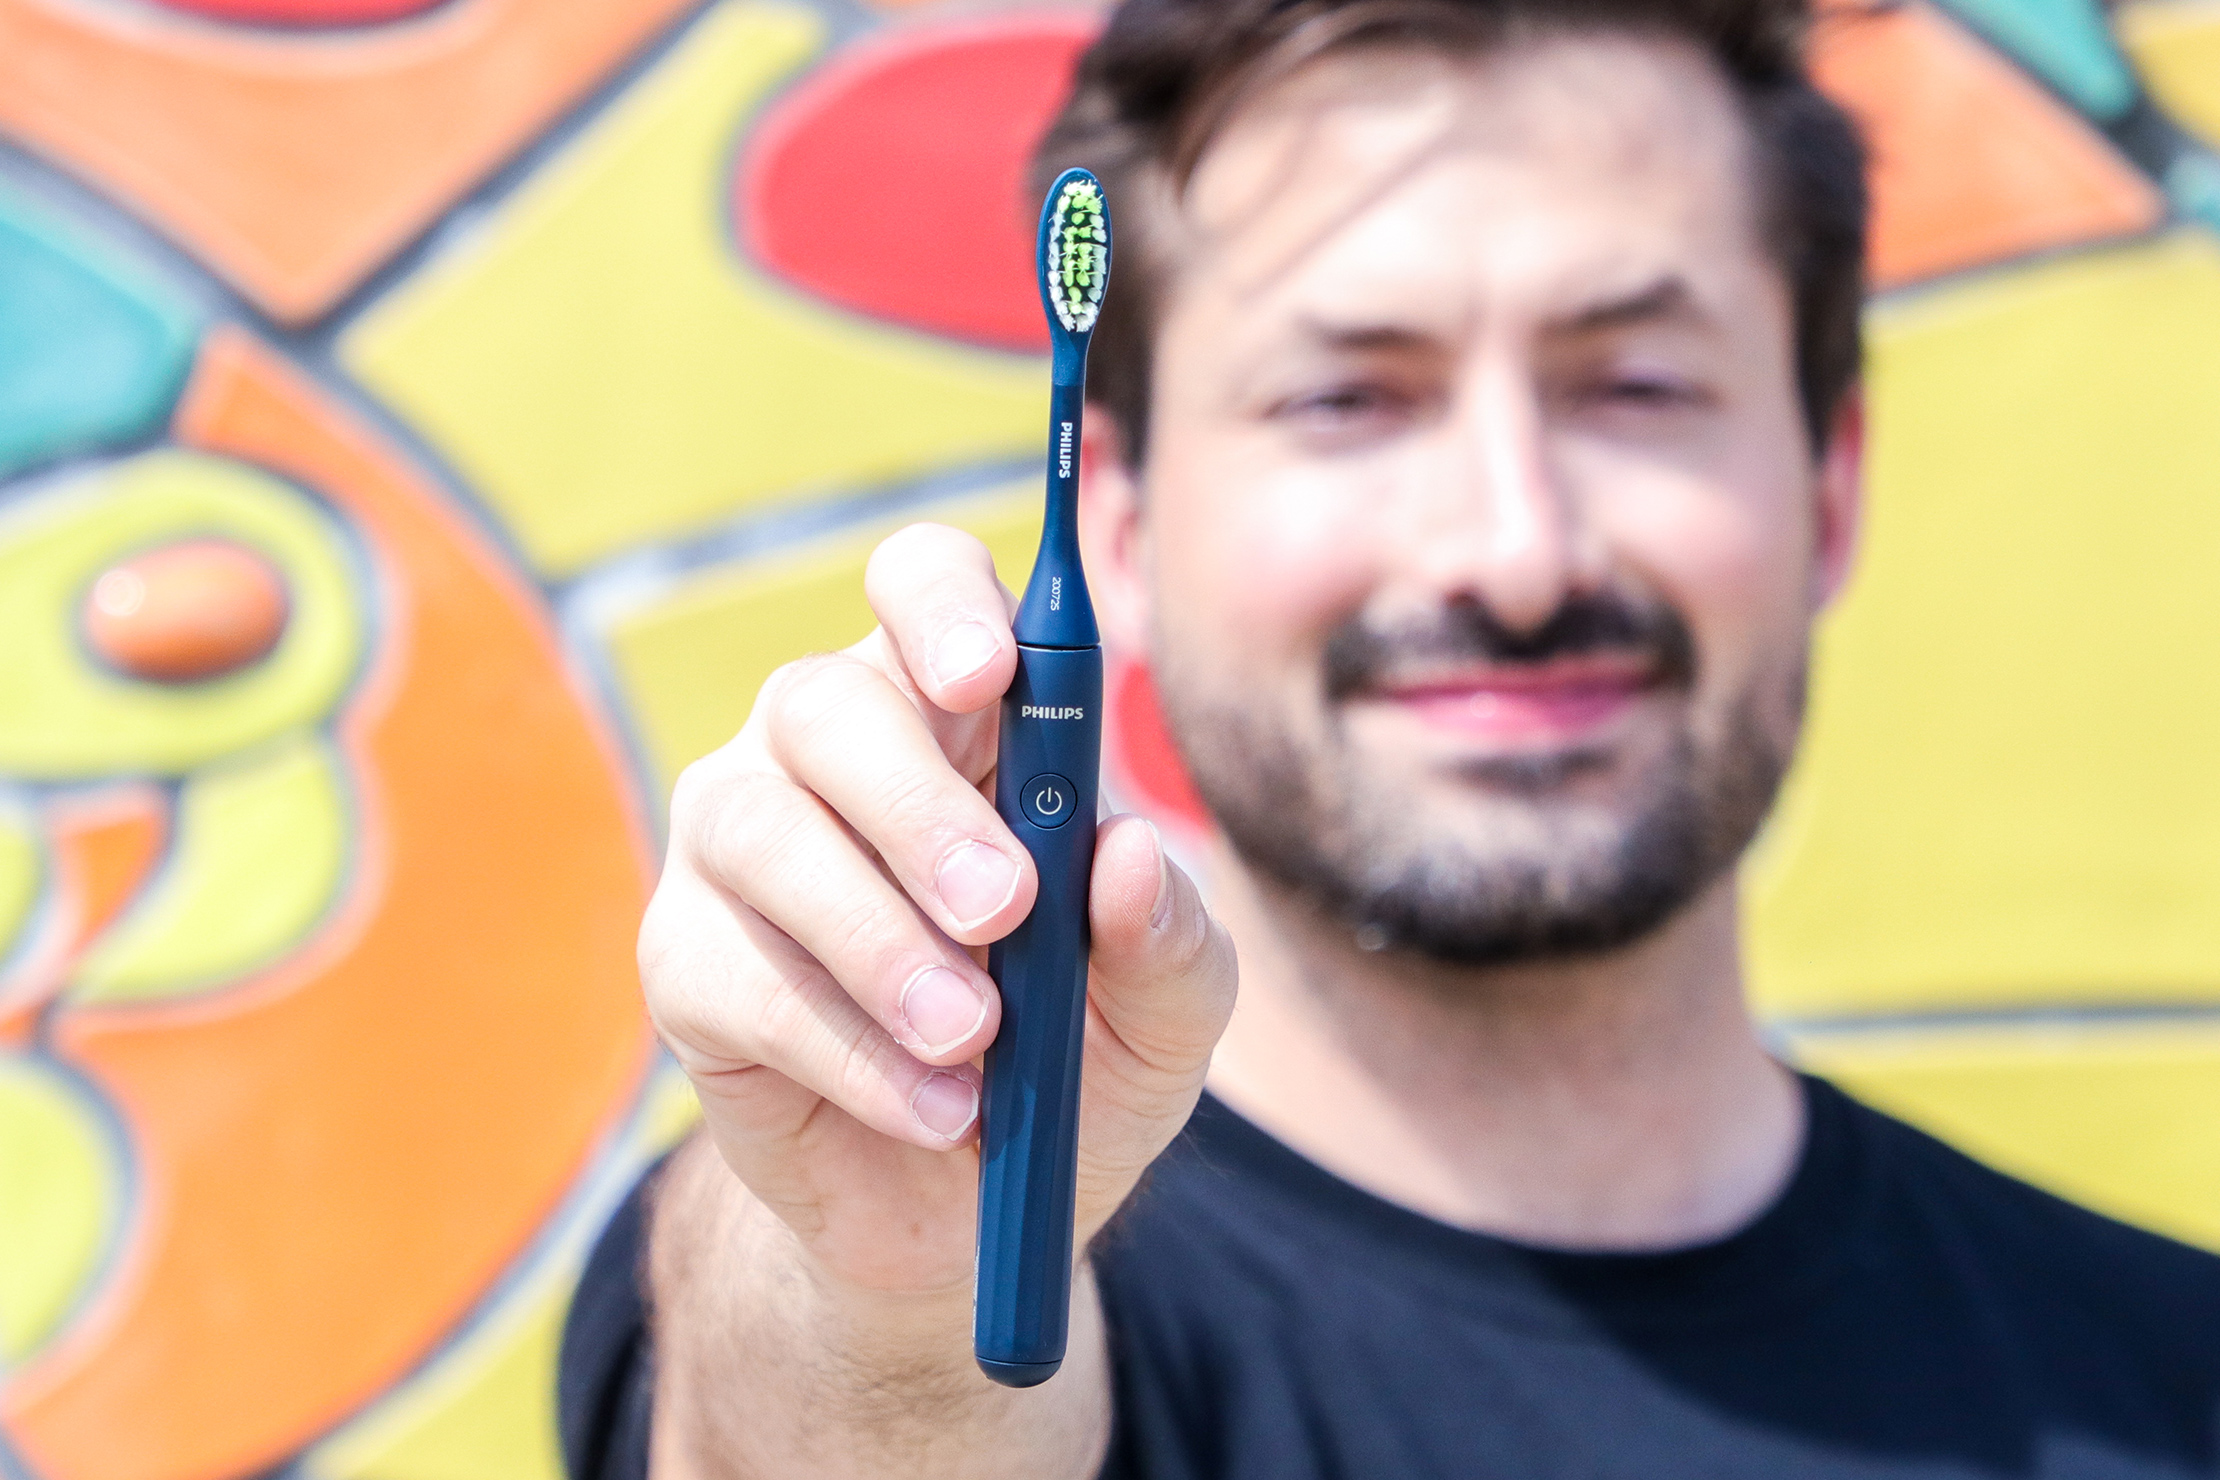 Philips One Battery Toothbrush by Sonicare Review